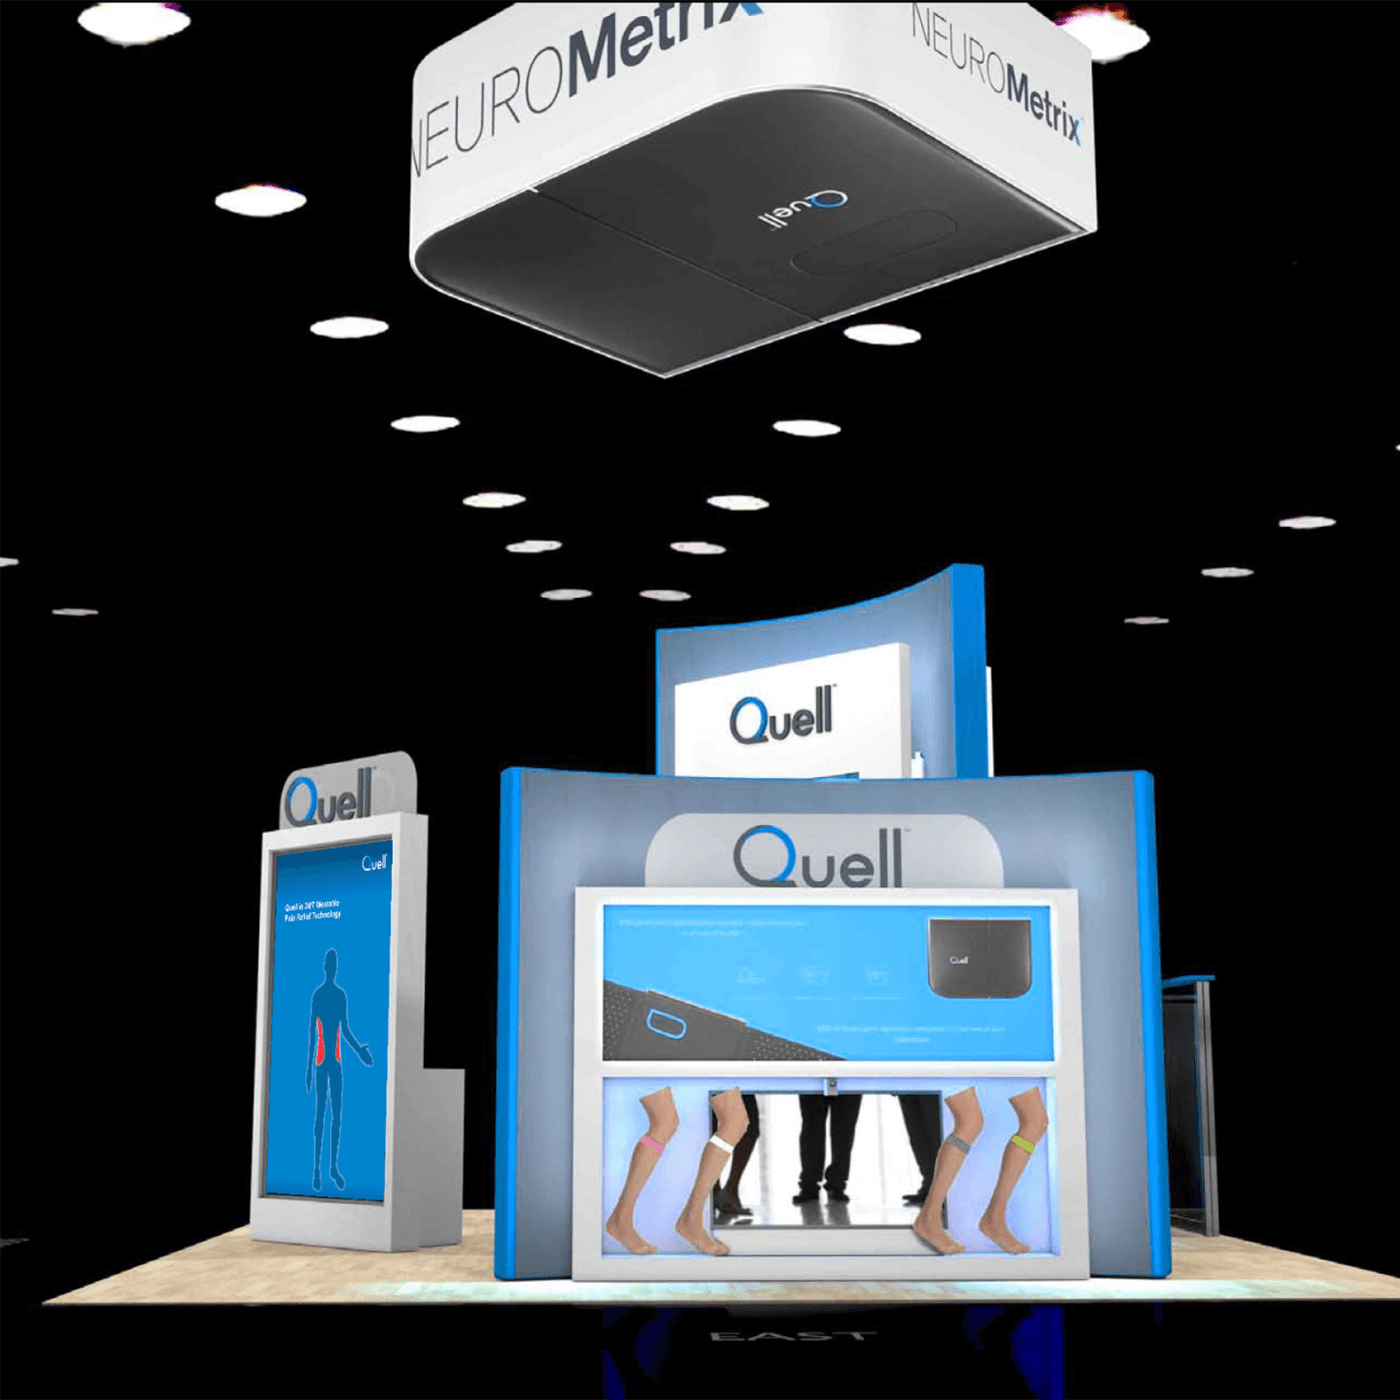 A render of a trade show booth for Neurometrix's Quell technology showing multiple large displays, including the 90″ screen of the Kinect driven interactive.